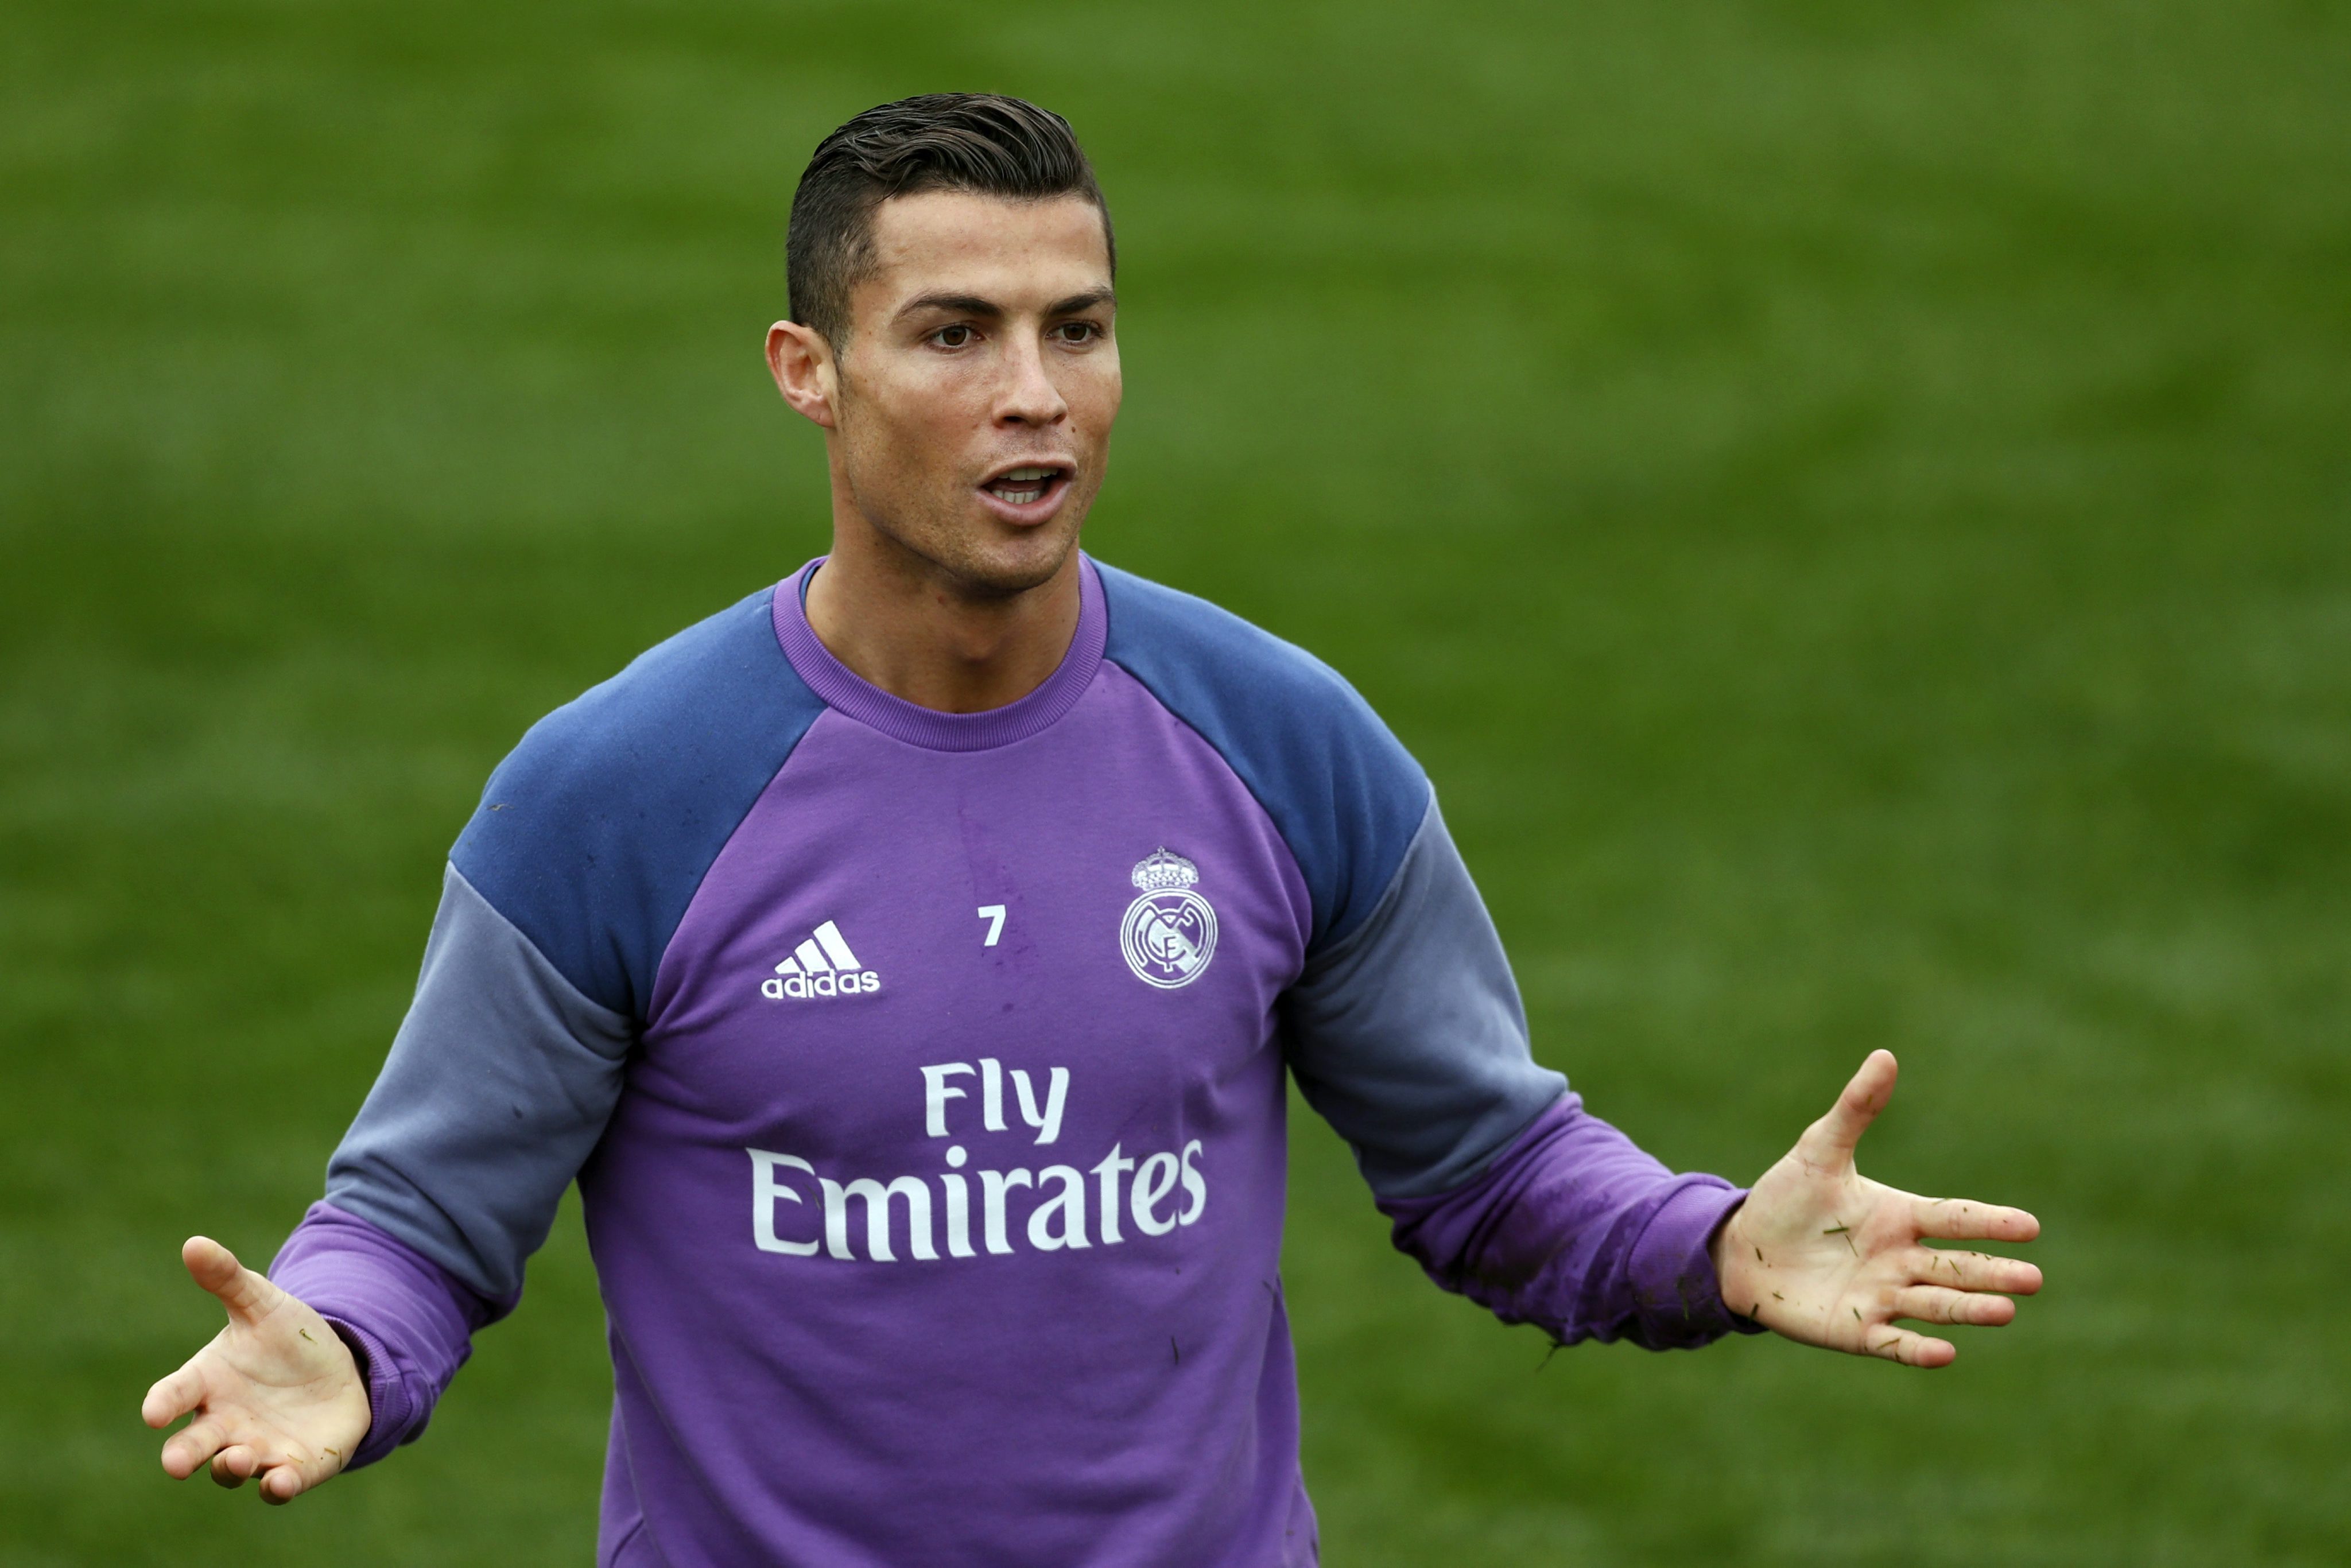 2016-10-28 00:00:00 epa05606831 Real Madrid's Cristiano Ronaldo gestures during a training session at the Valdebebas Sports City in Madrid, Spain, 28 October 2016. Real Madrid faces Alaves in a Primera Division match on 29 October. EPA/JAVIER LIZON